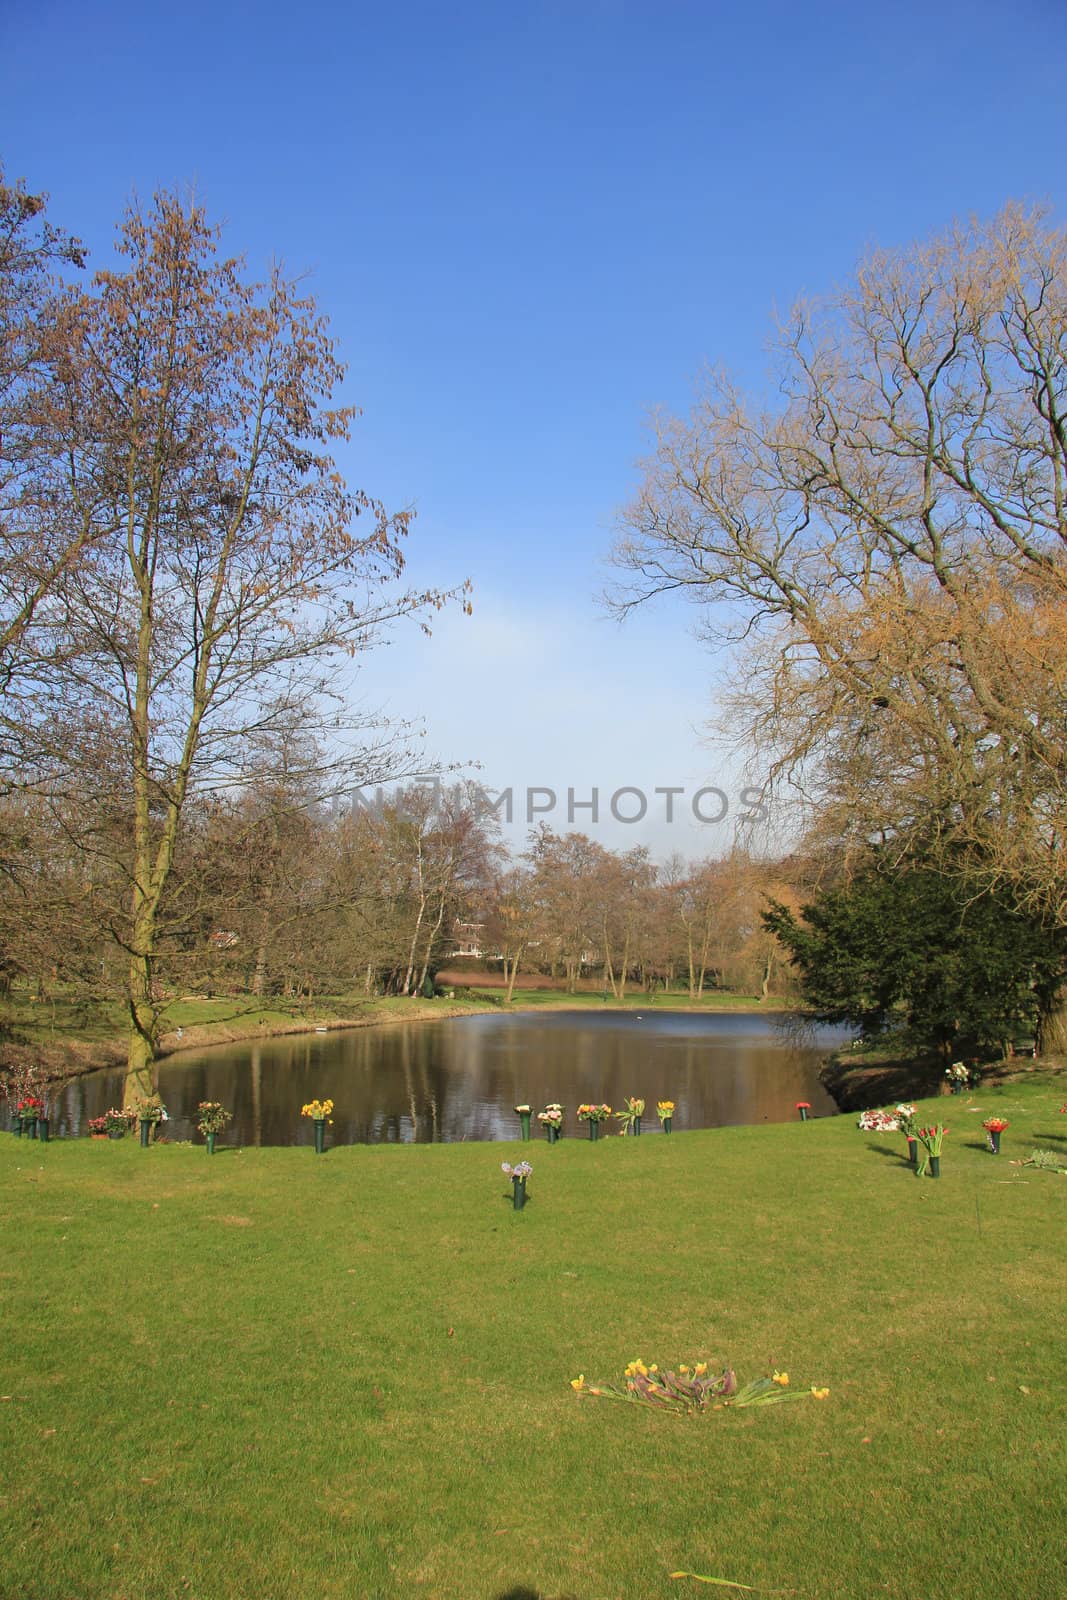 park and pond near a crematorium, places of worship where ash is spread